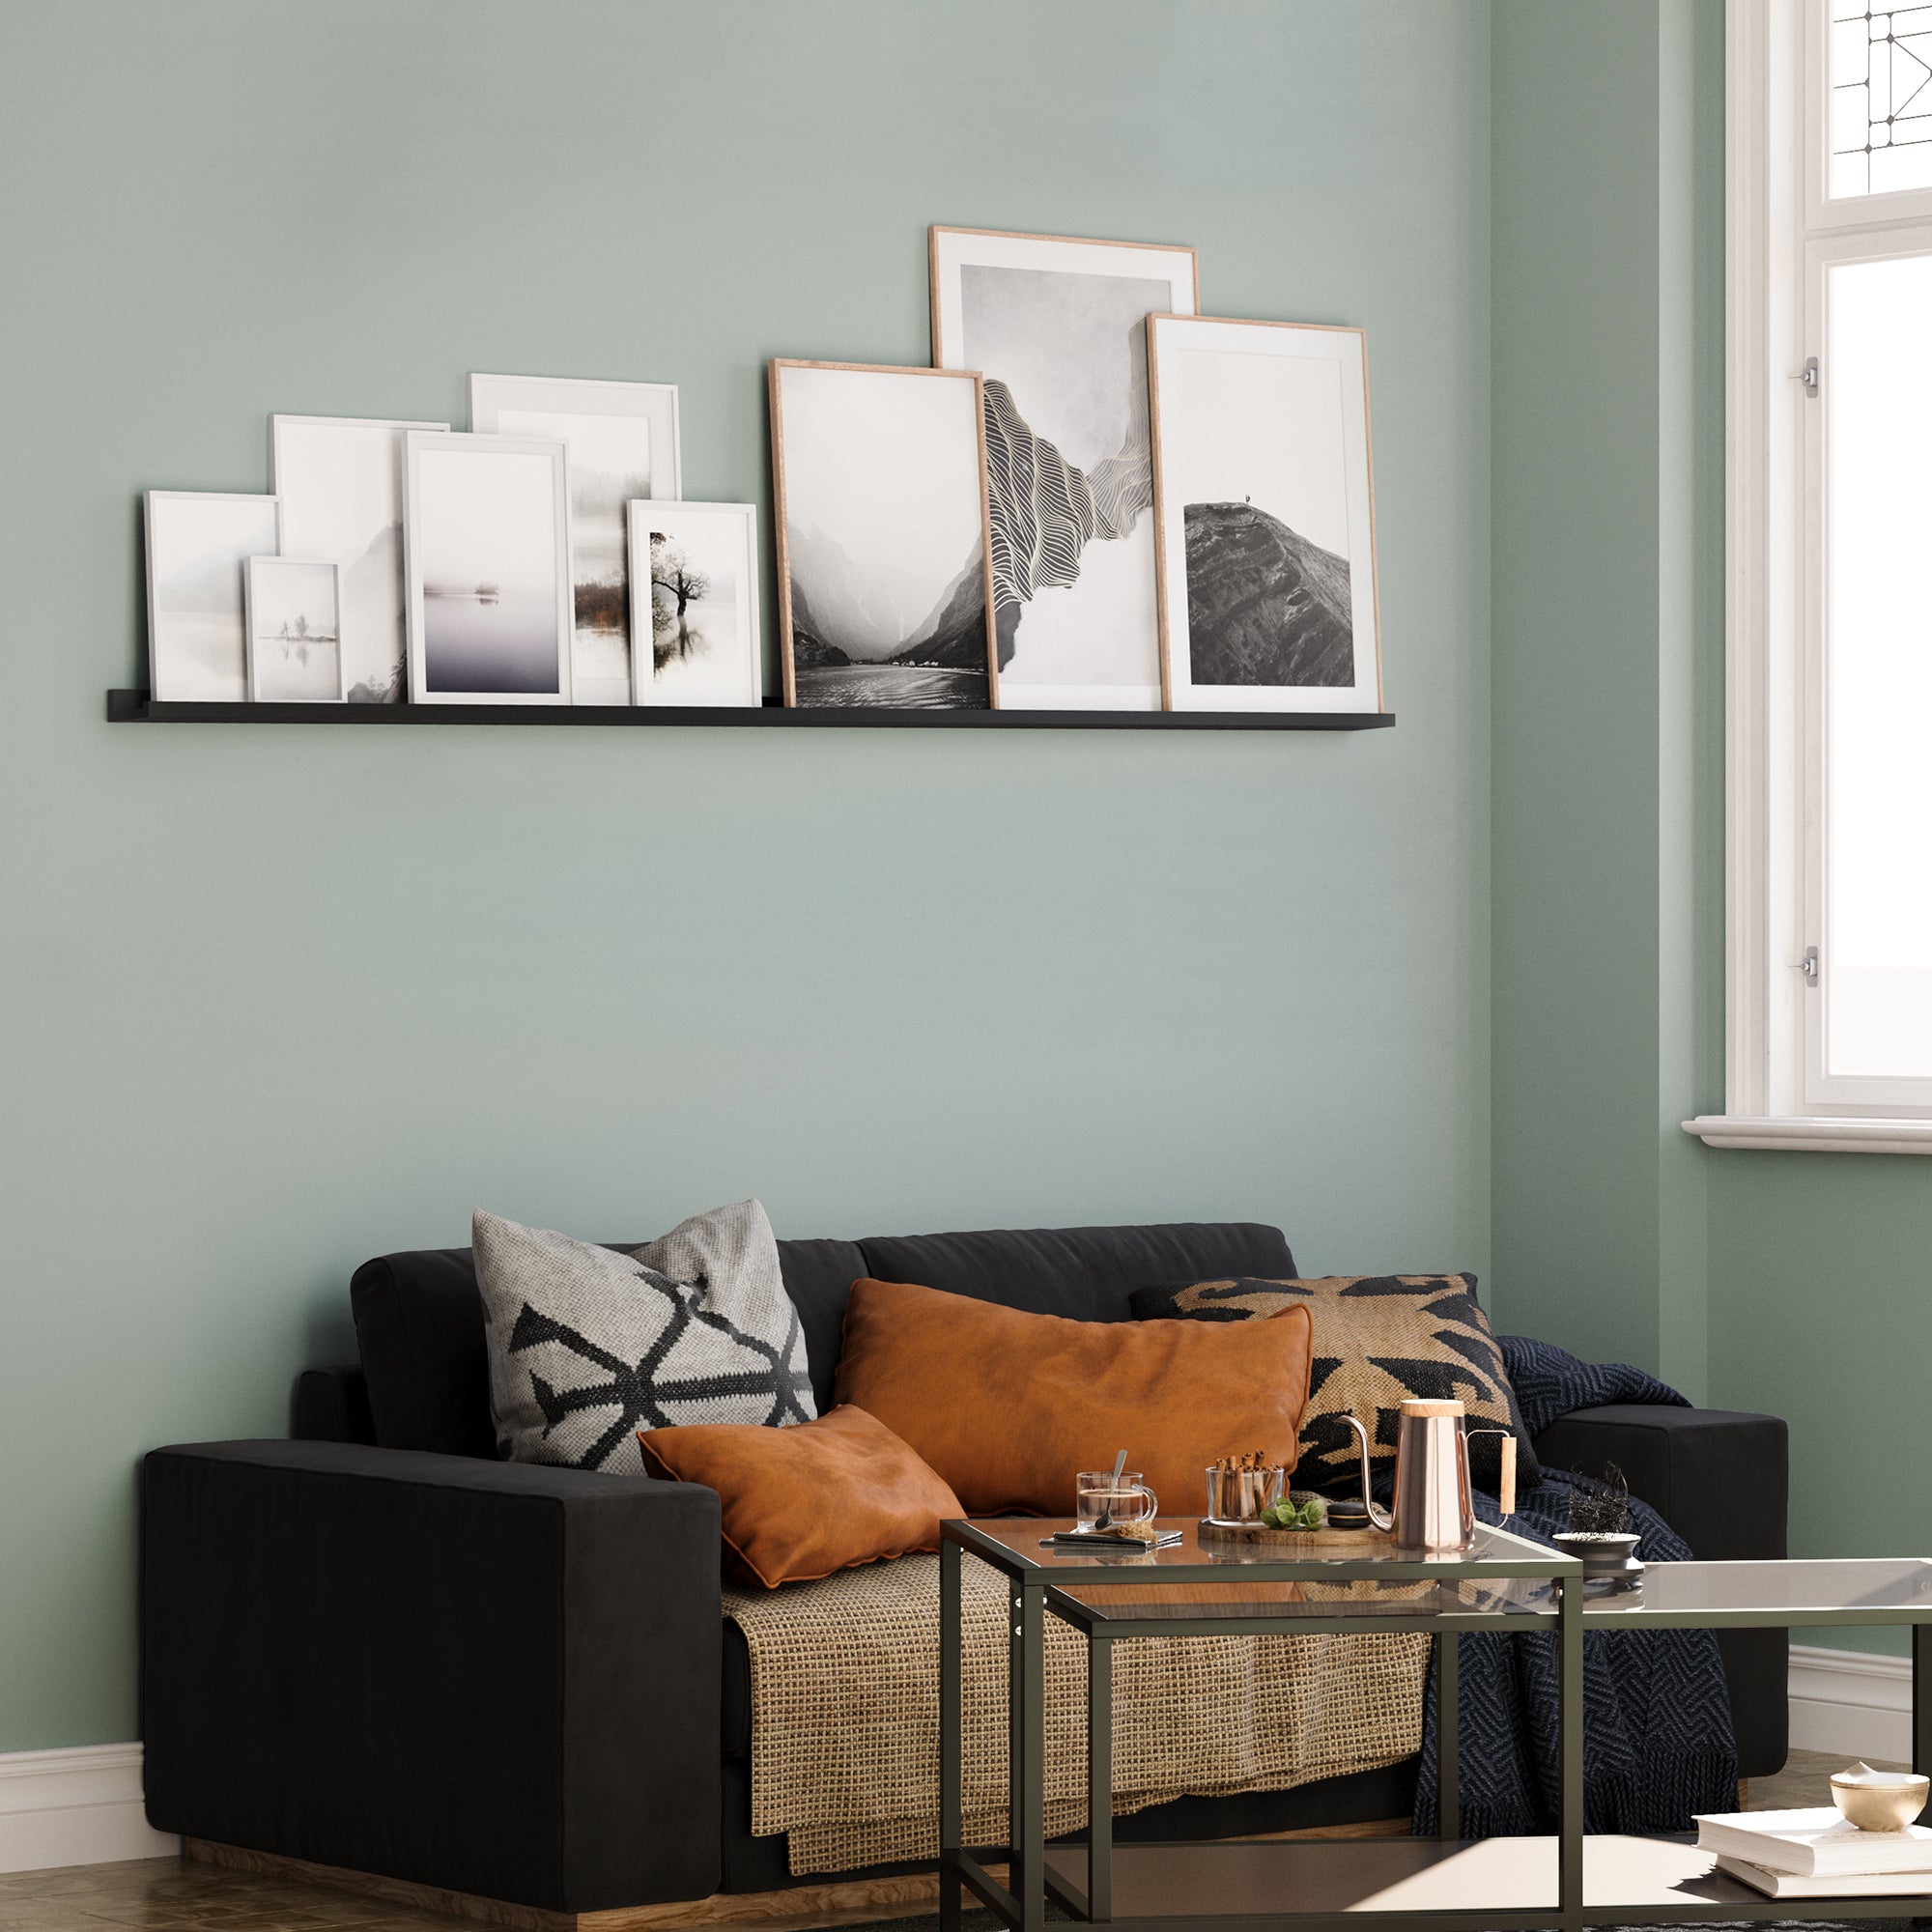 Black shelf displaying frames over a sofa in a living room.